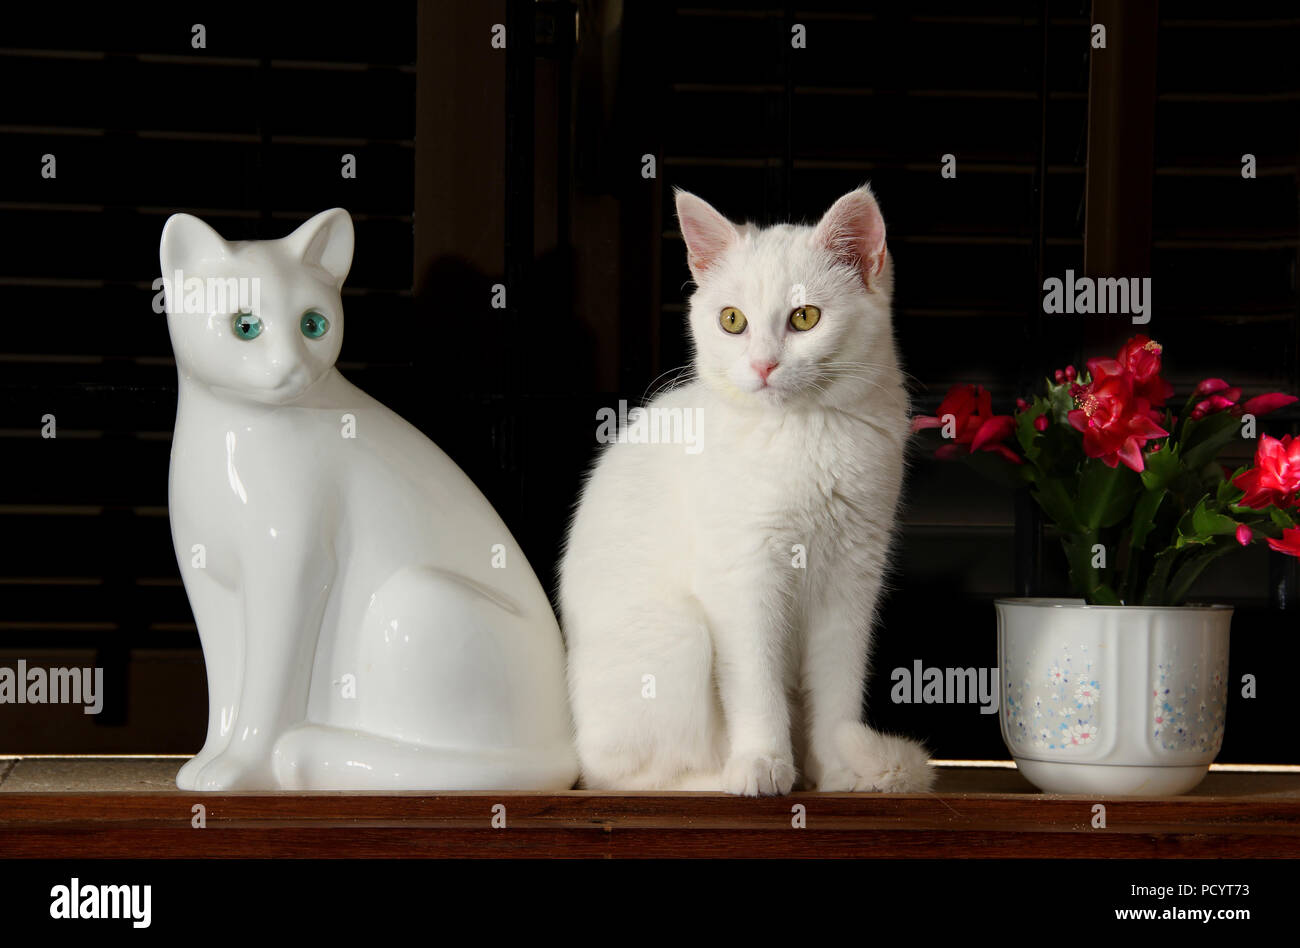 white kitten, 3 month old, sitting close to a white figurine of a cat Stock Photo